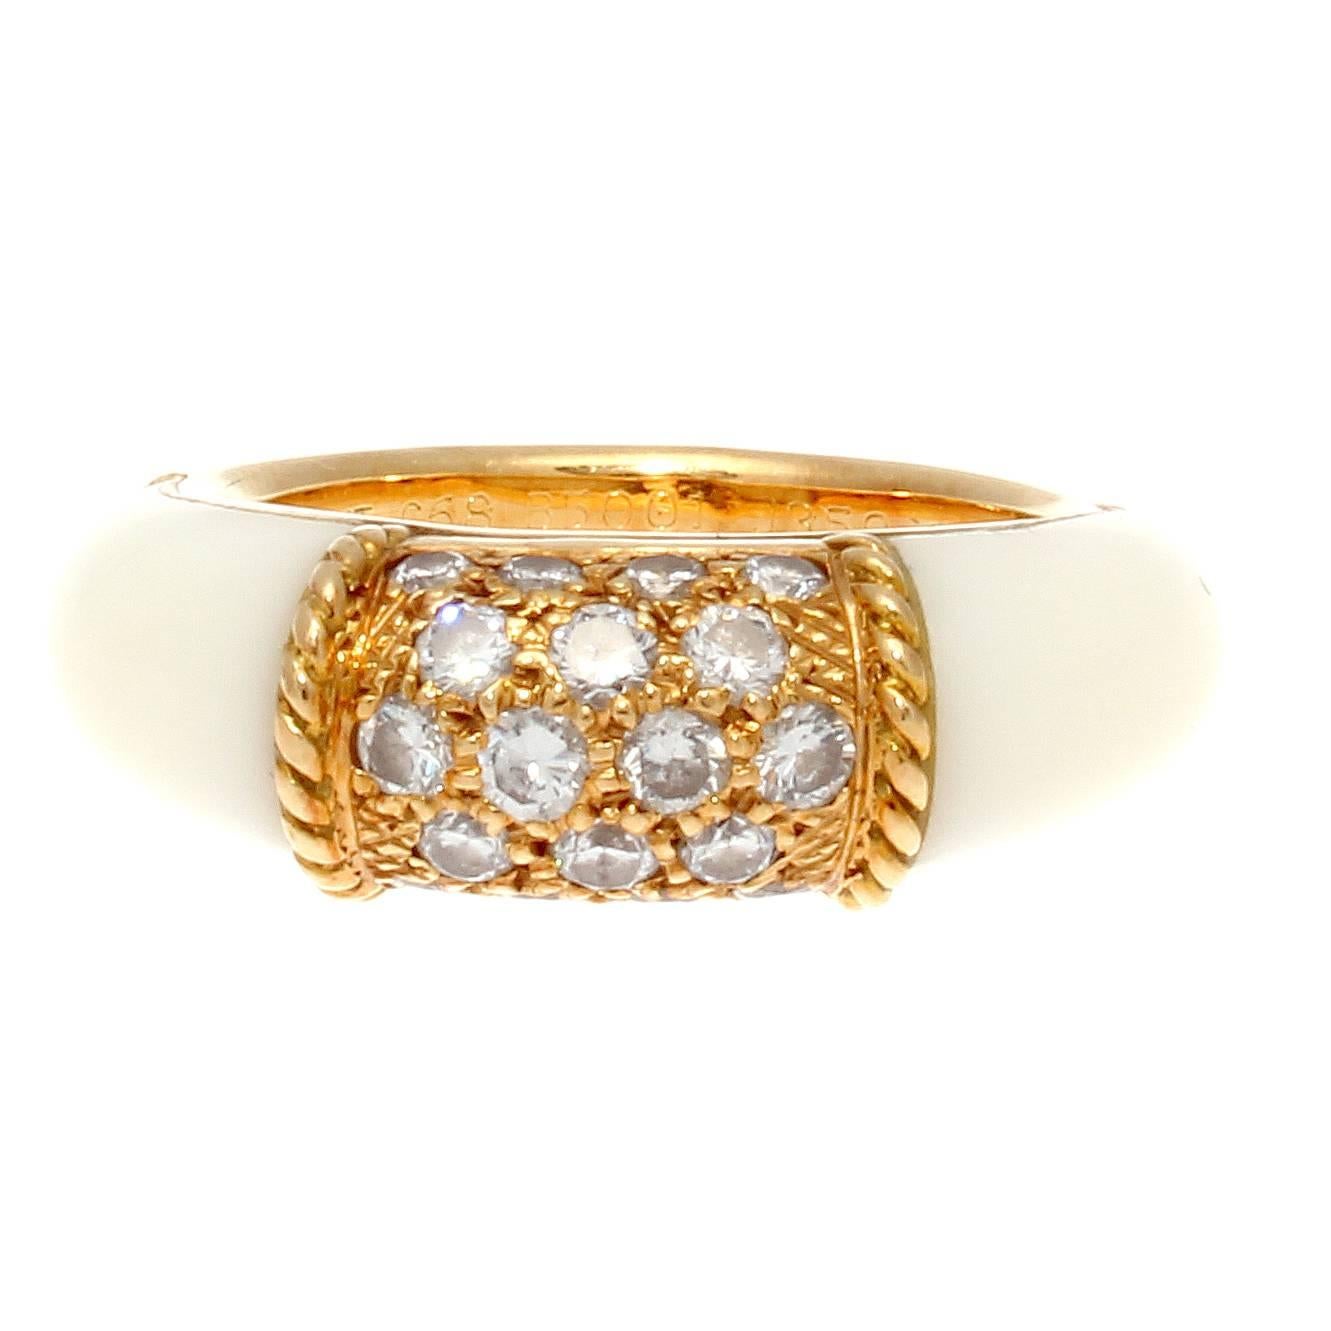 The lovely and popular Van Cleef & Arpels Philippine ring. Stylized with textured gold that is embedded with clean, white diamonds throughout. The garden of diamonds has been enclosed by gold rope motifs that have white coral cascading down either